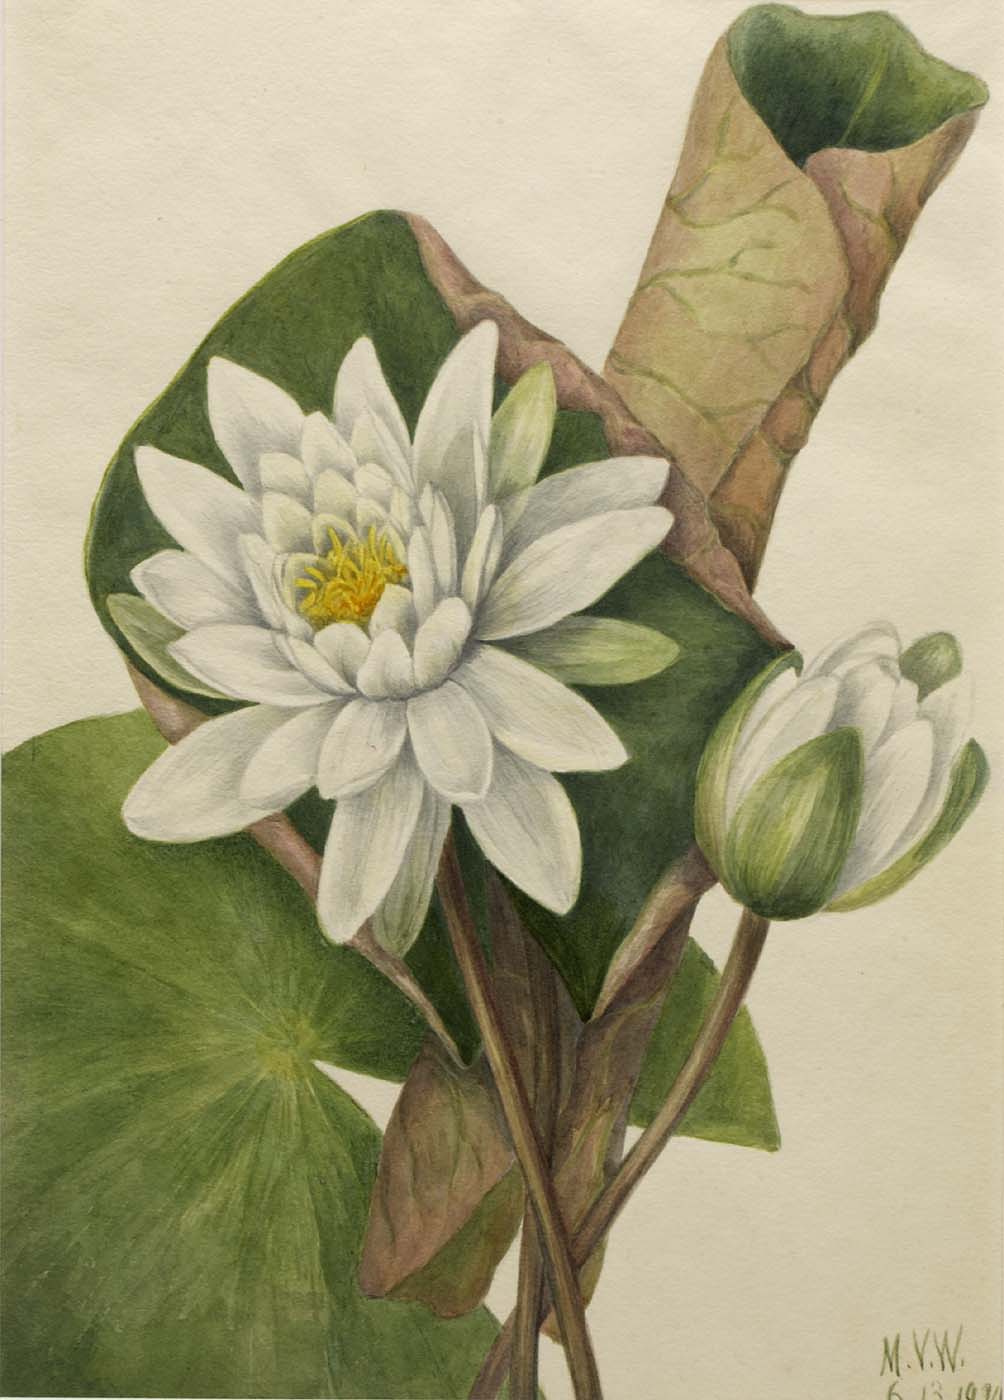 1920 American White Water Lily illustration by Mary Vaux Walcott.